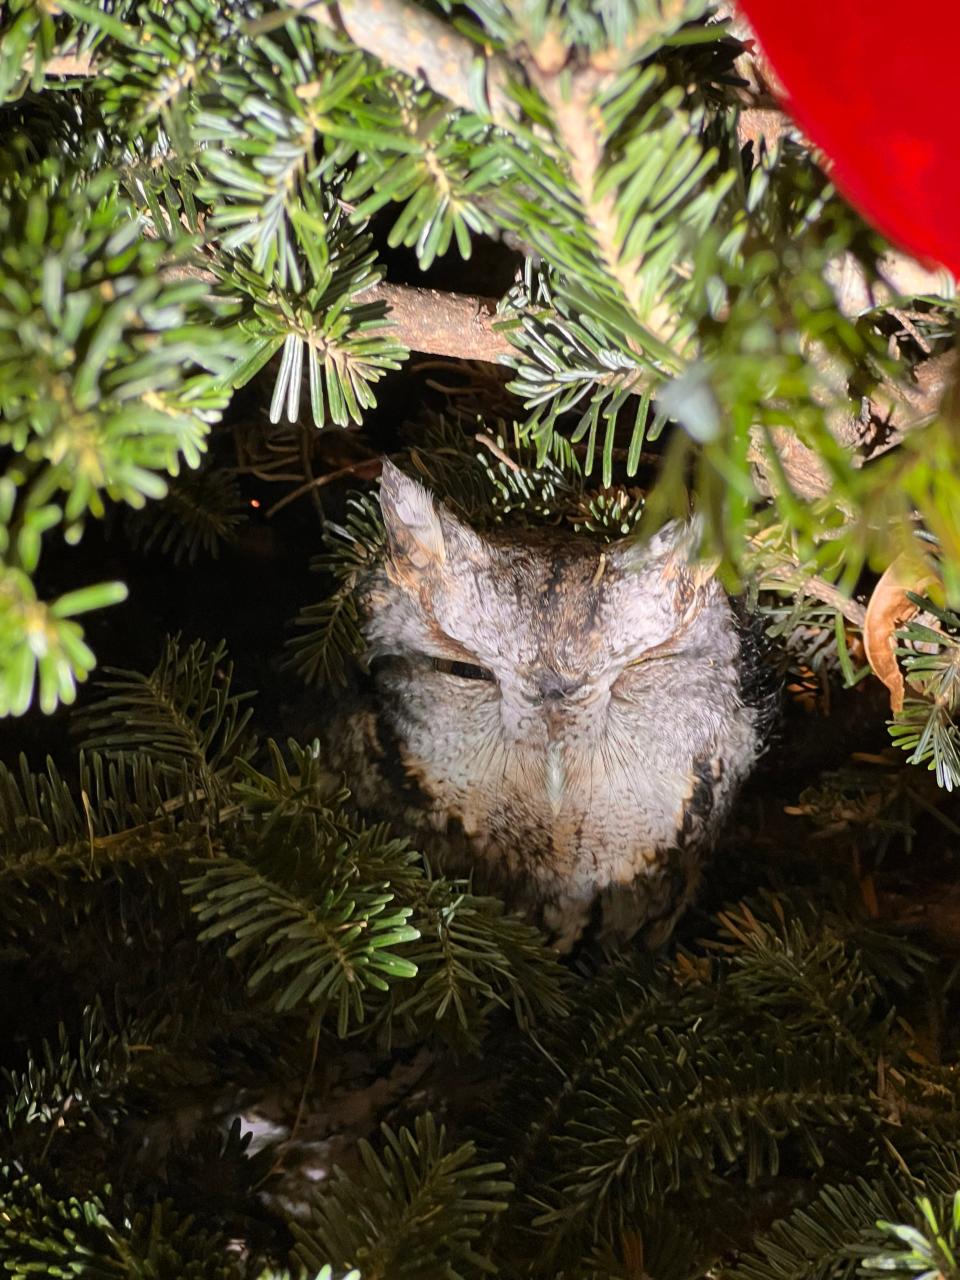 Pictures of the owl found in Christmas tree.